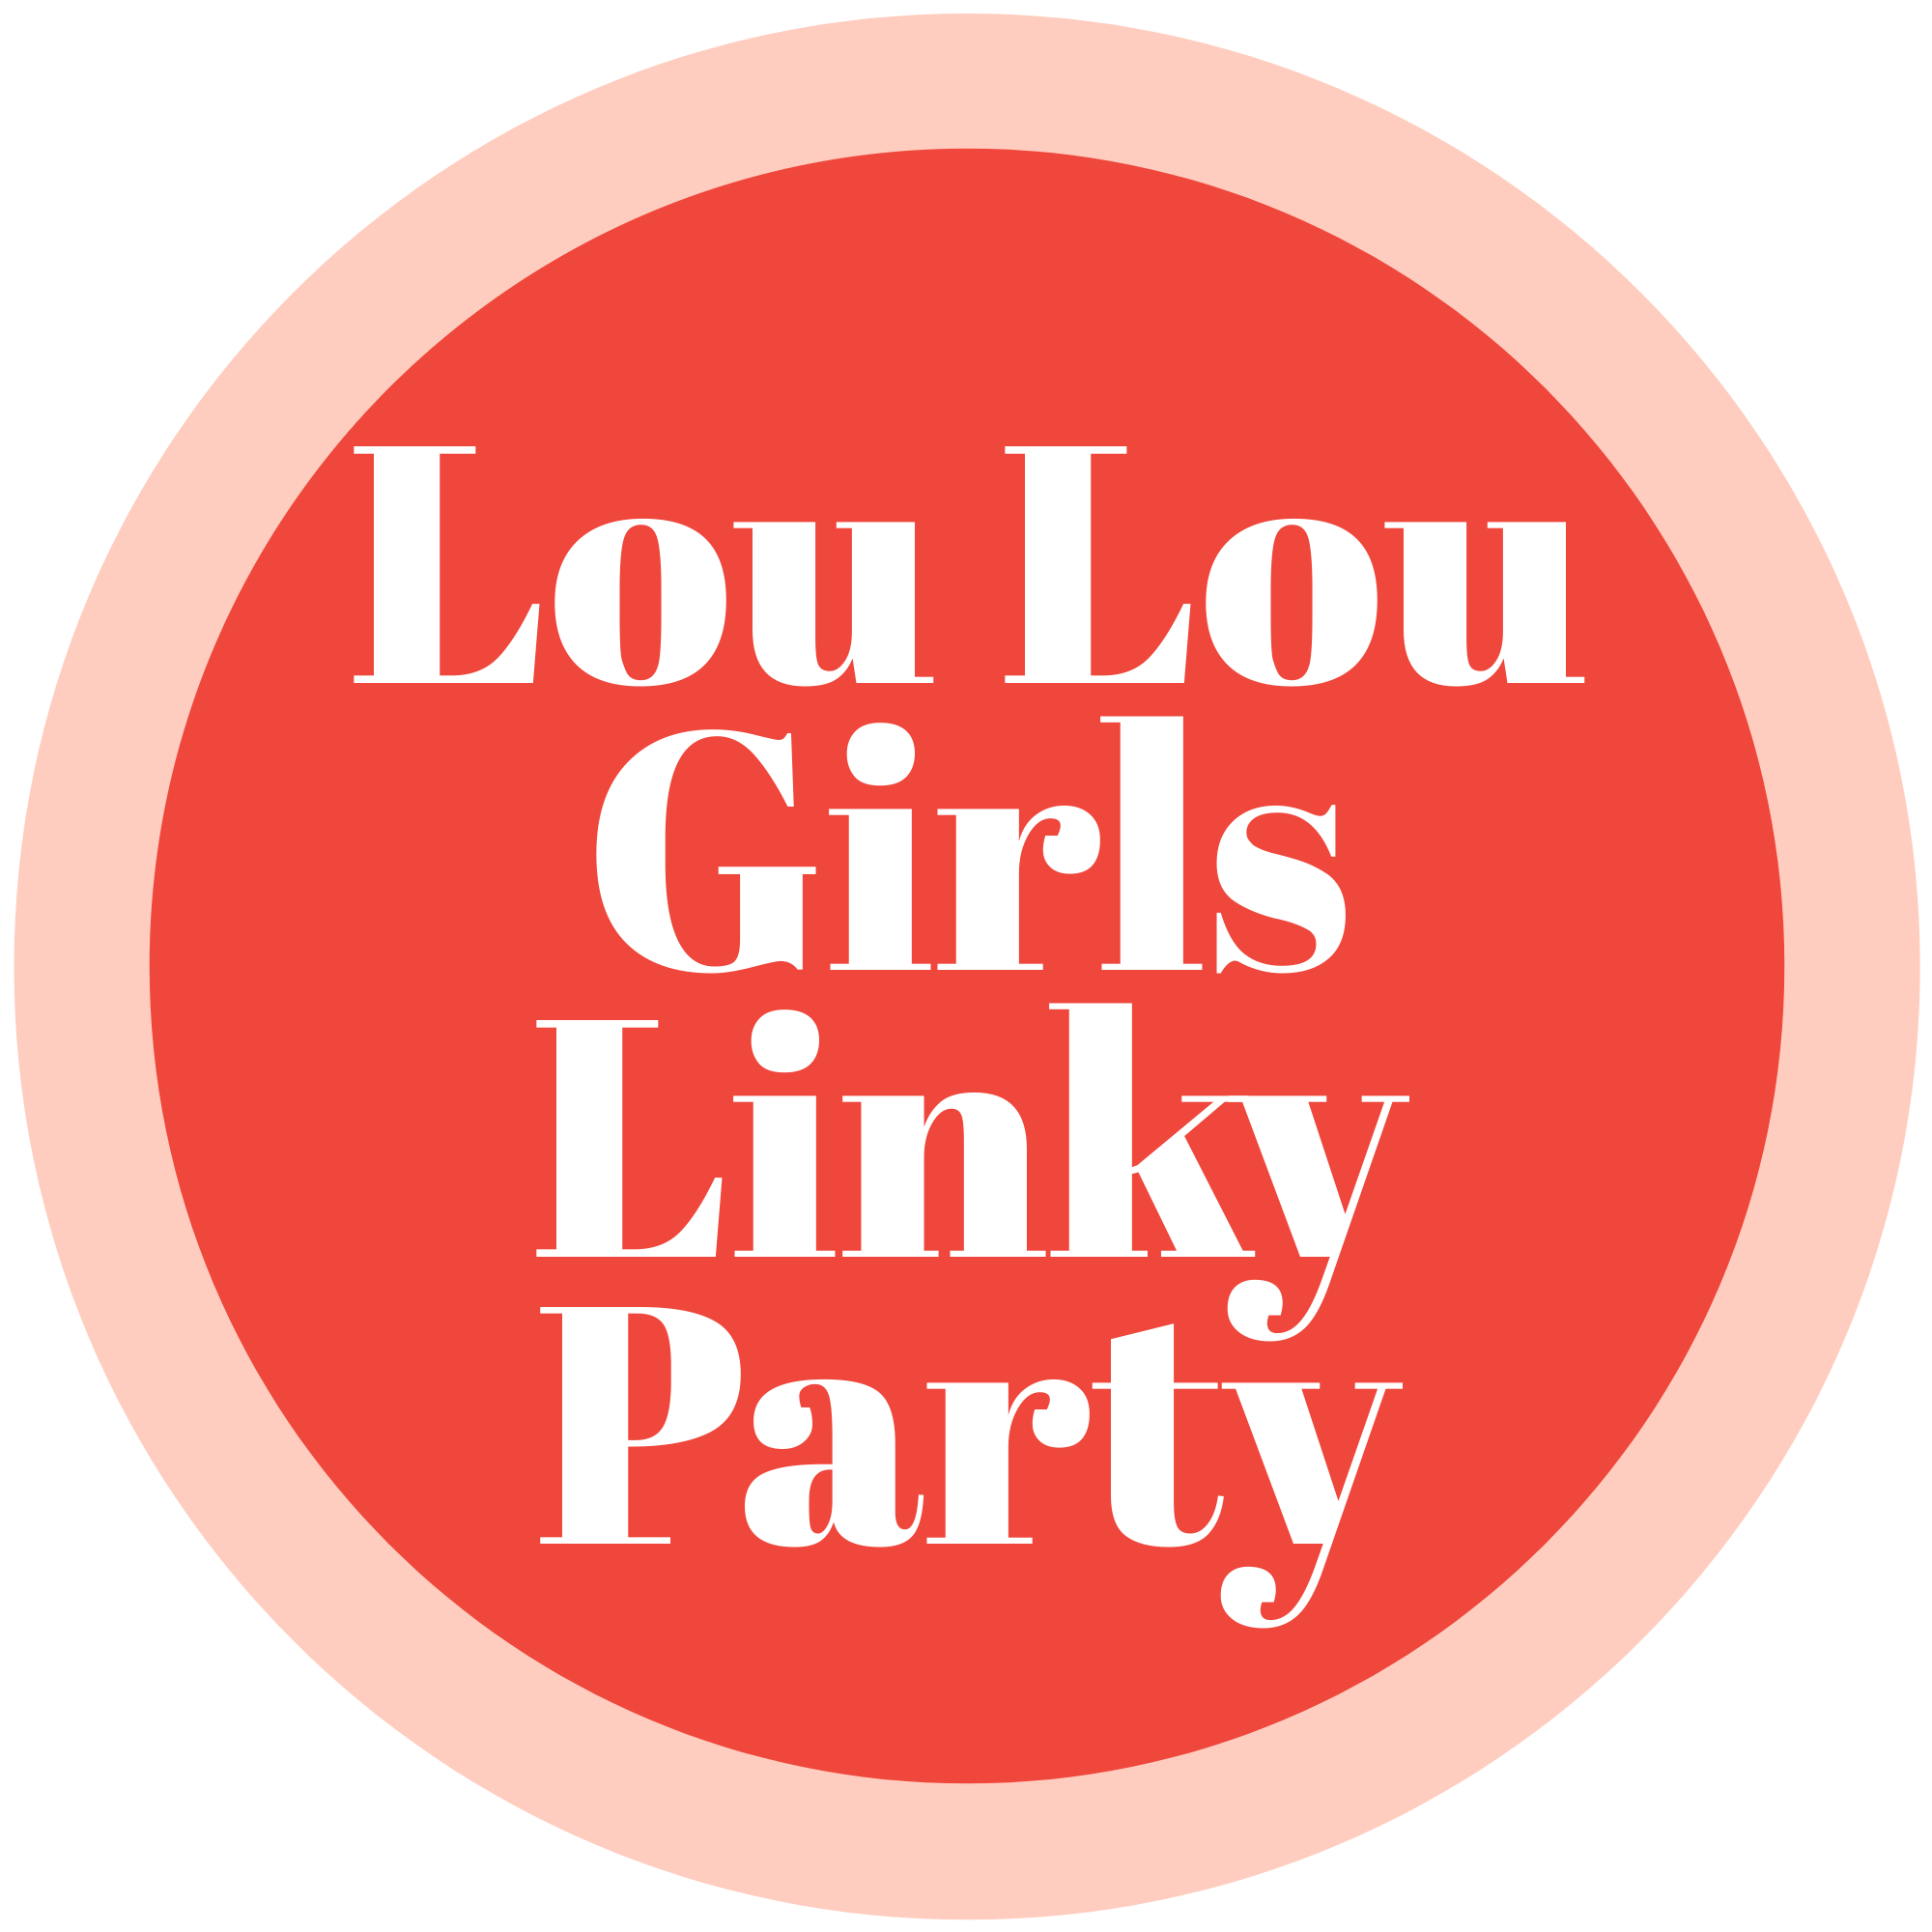 Lou Lou Girls Fabulous Party 468 #linkyparty #bloghop #linkyparties